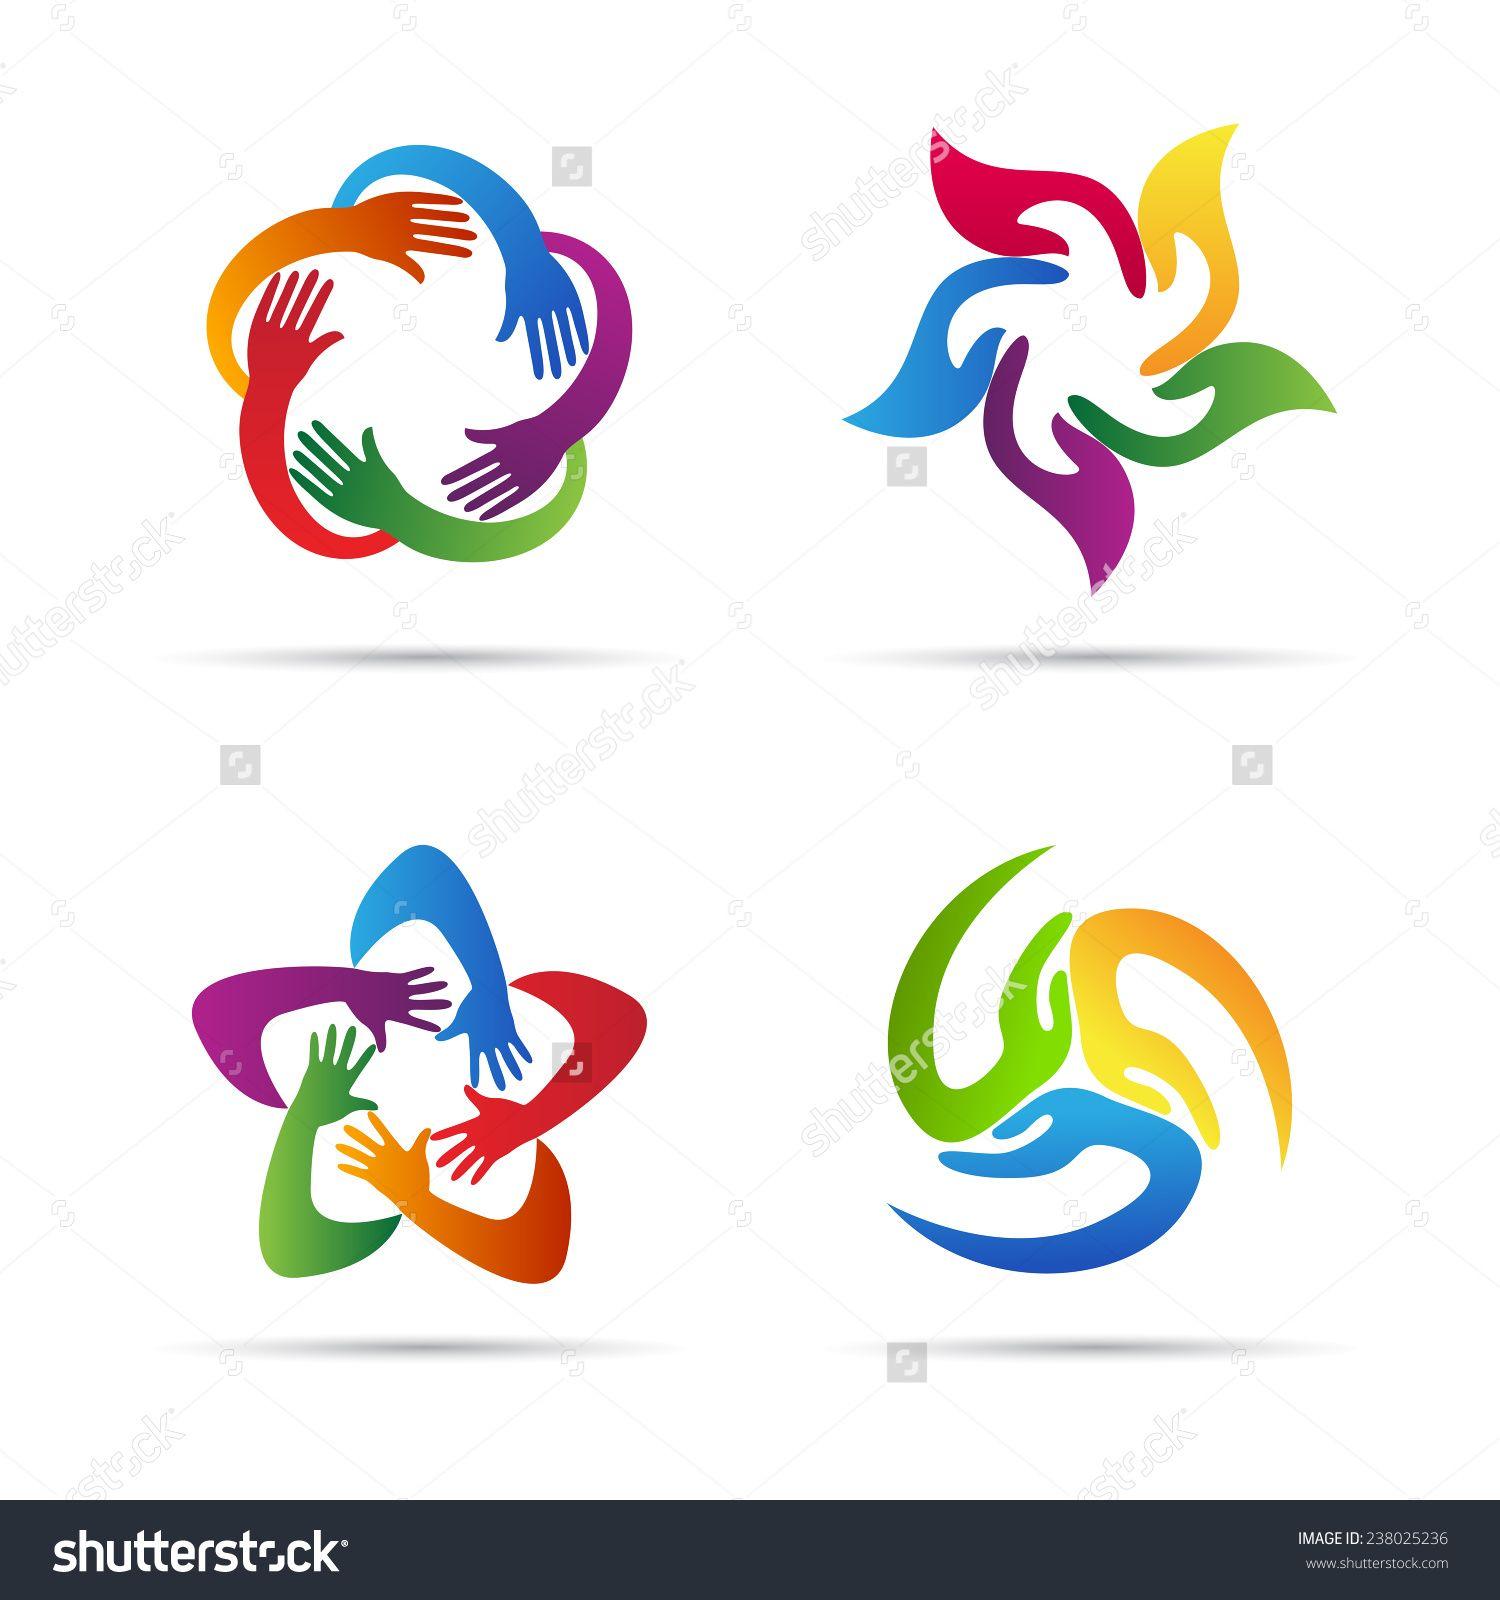 Abstract Hand Logo - Abstract Hands Vector Design Represents Teamwork, Unity, Signs